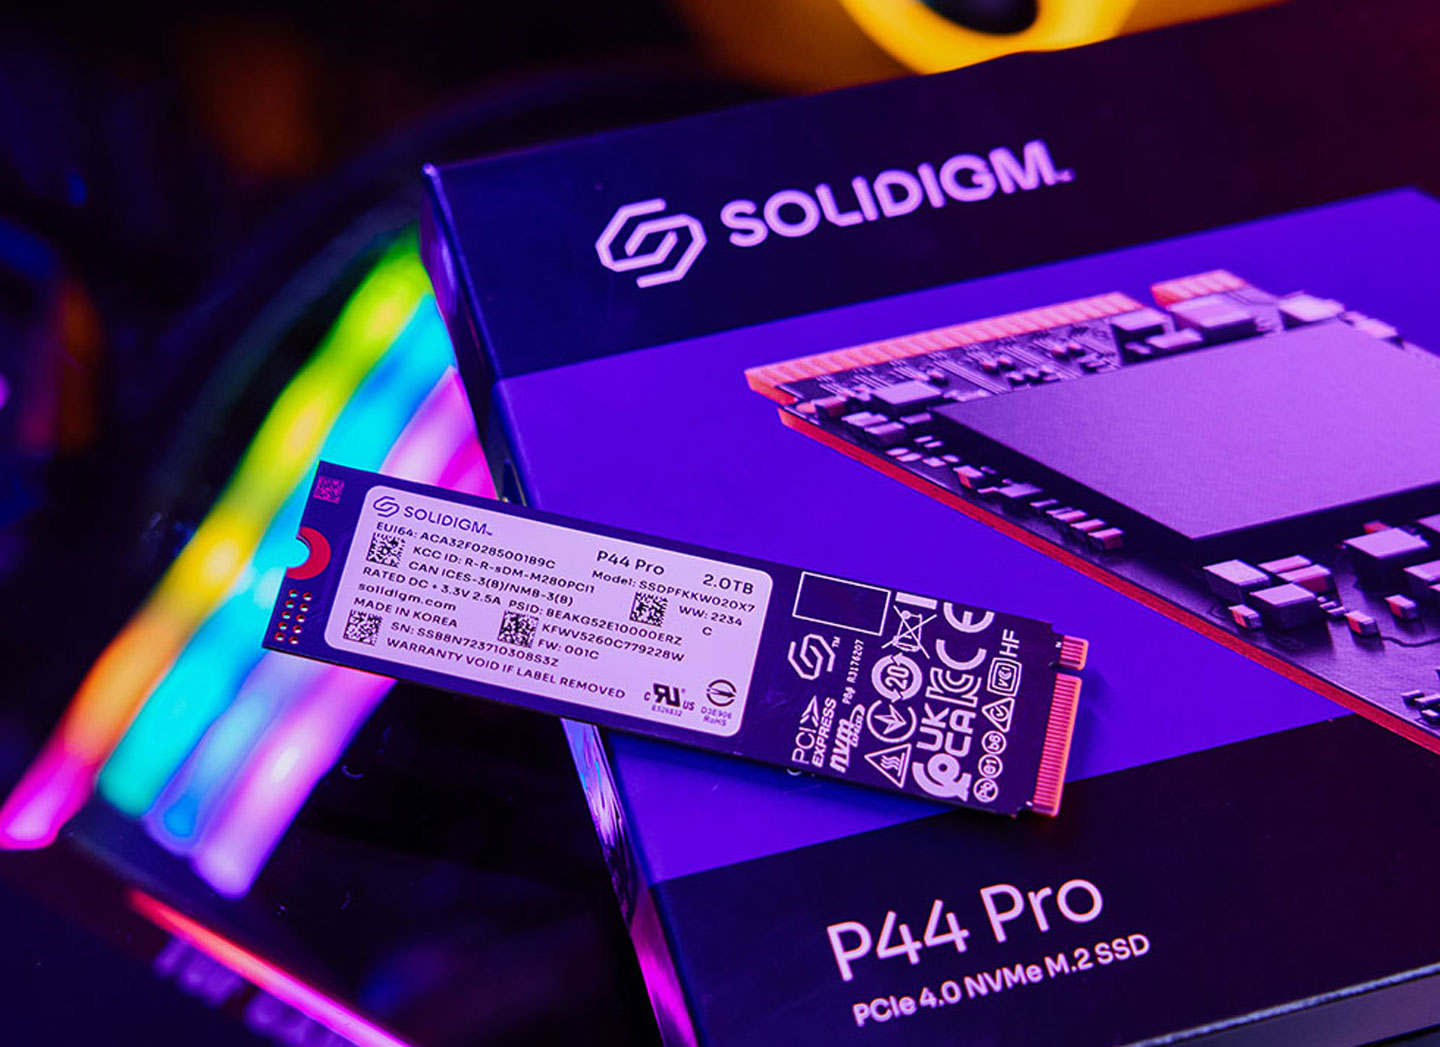 There is no component layout on the back of the SOLIDIGM P44 Pro body, only a serial number and model sticker is posted.